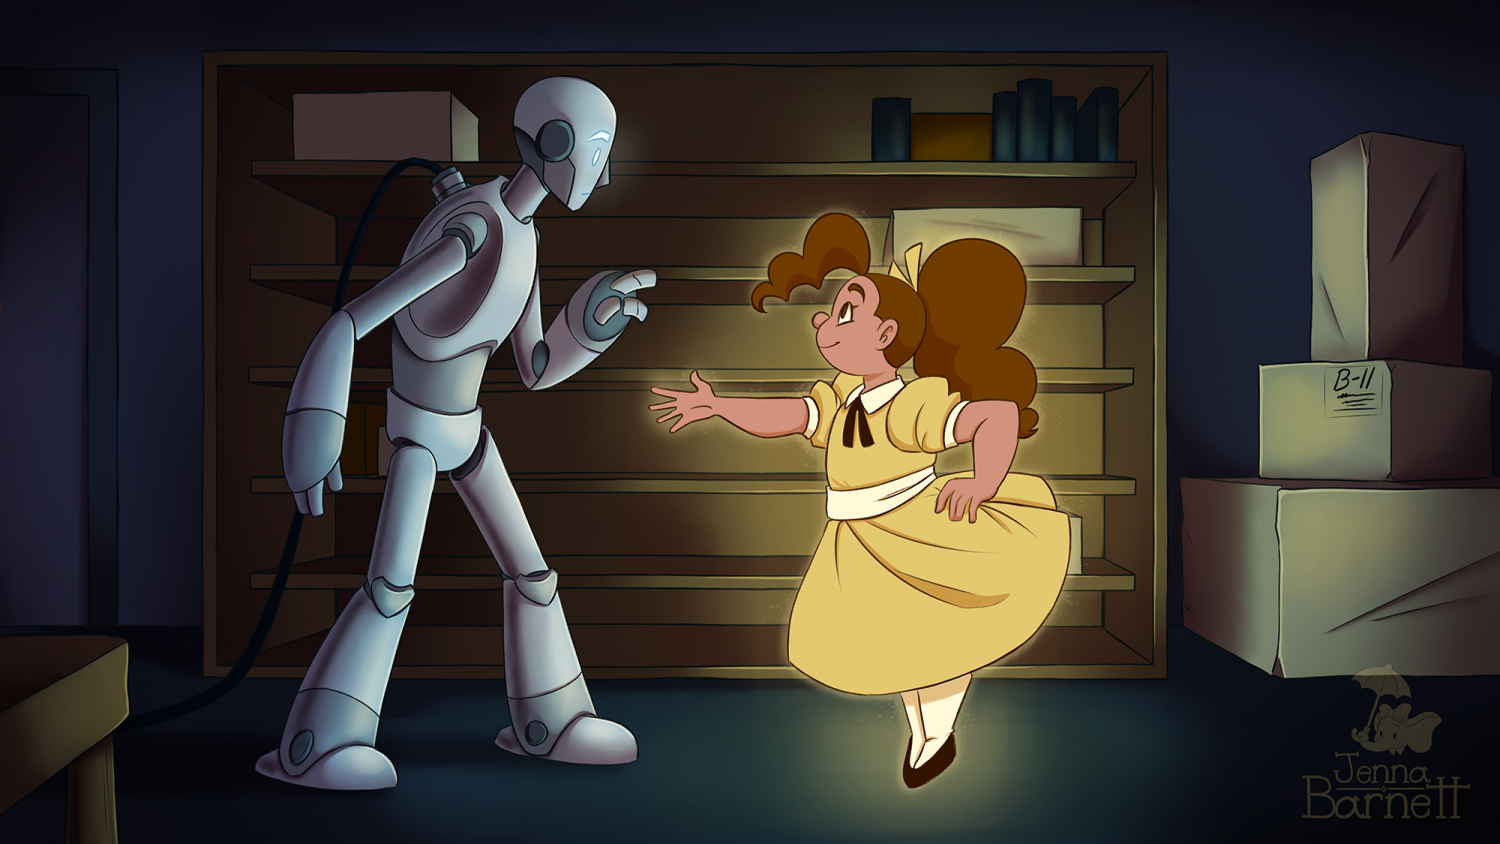 A key frame board of the android with a ghostly figure. Alma, the ghost, has her hand excitedly extended toward Logan as if to shake his hand, but Logan appears to be hesitant.